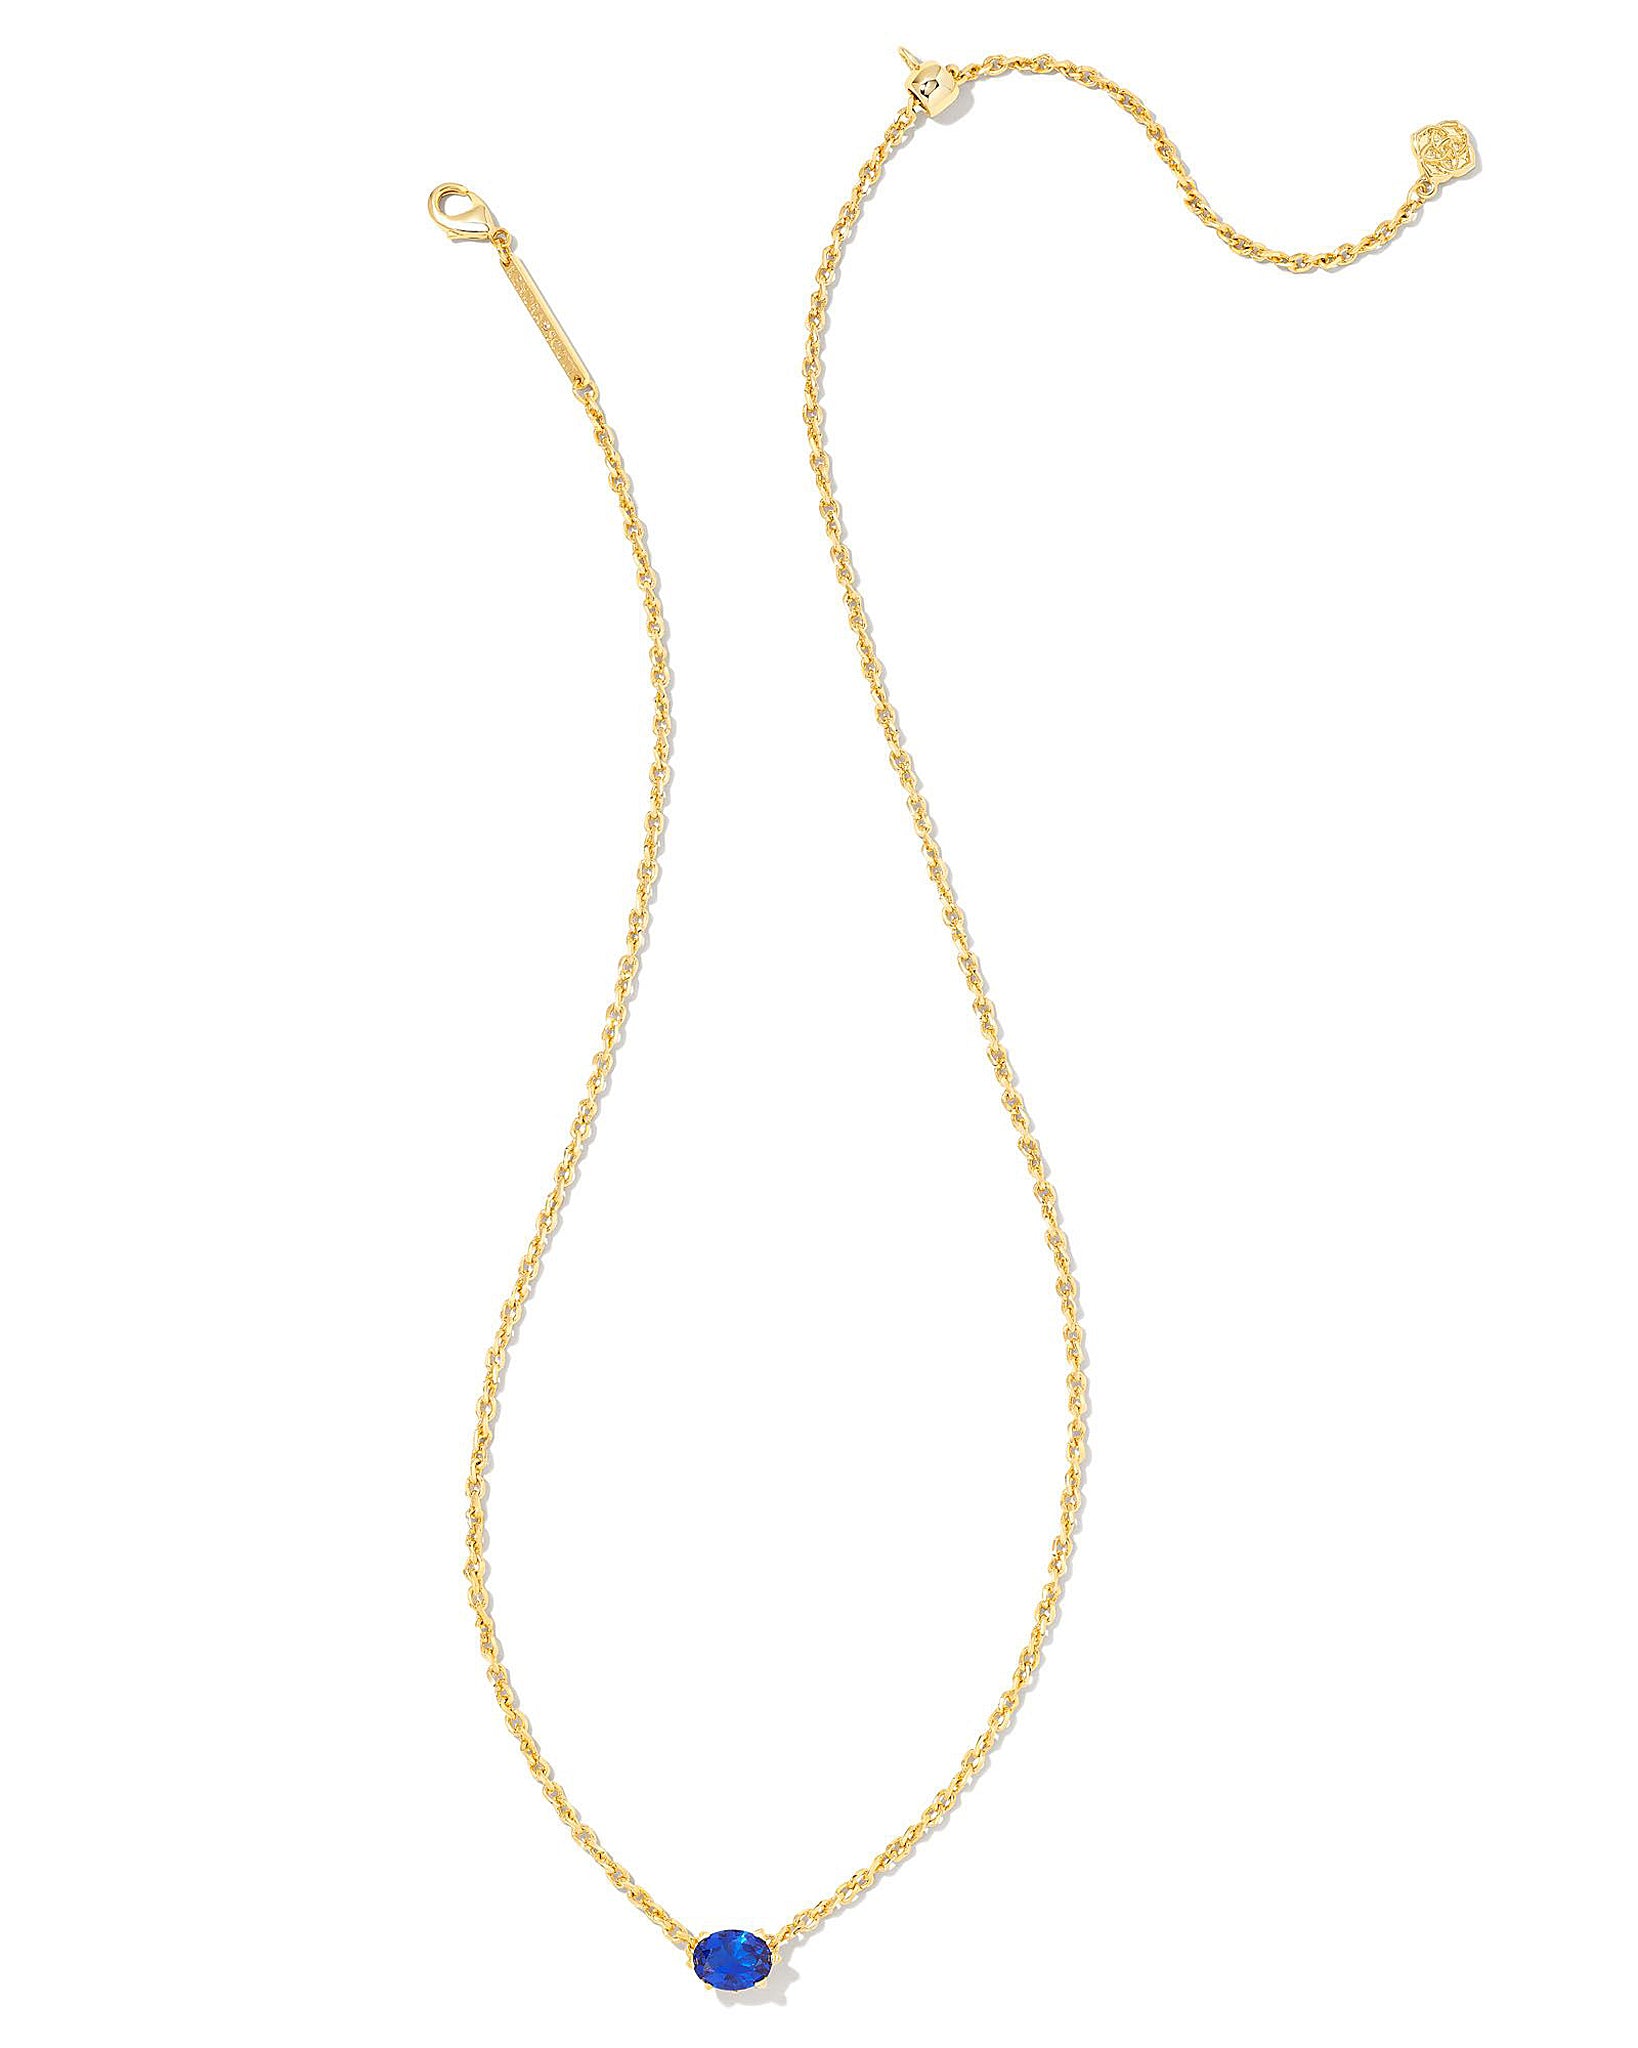 Kendra Scott Cailin Oval Pendant Necklace in Blue Crystal and Gold